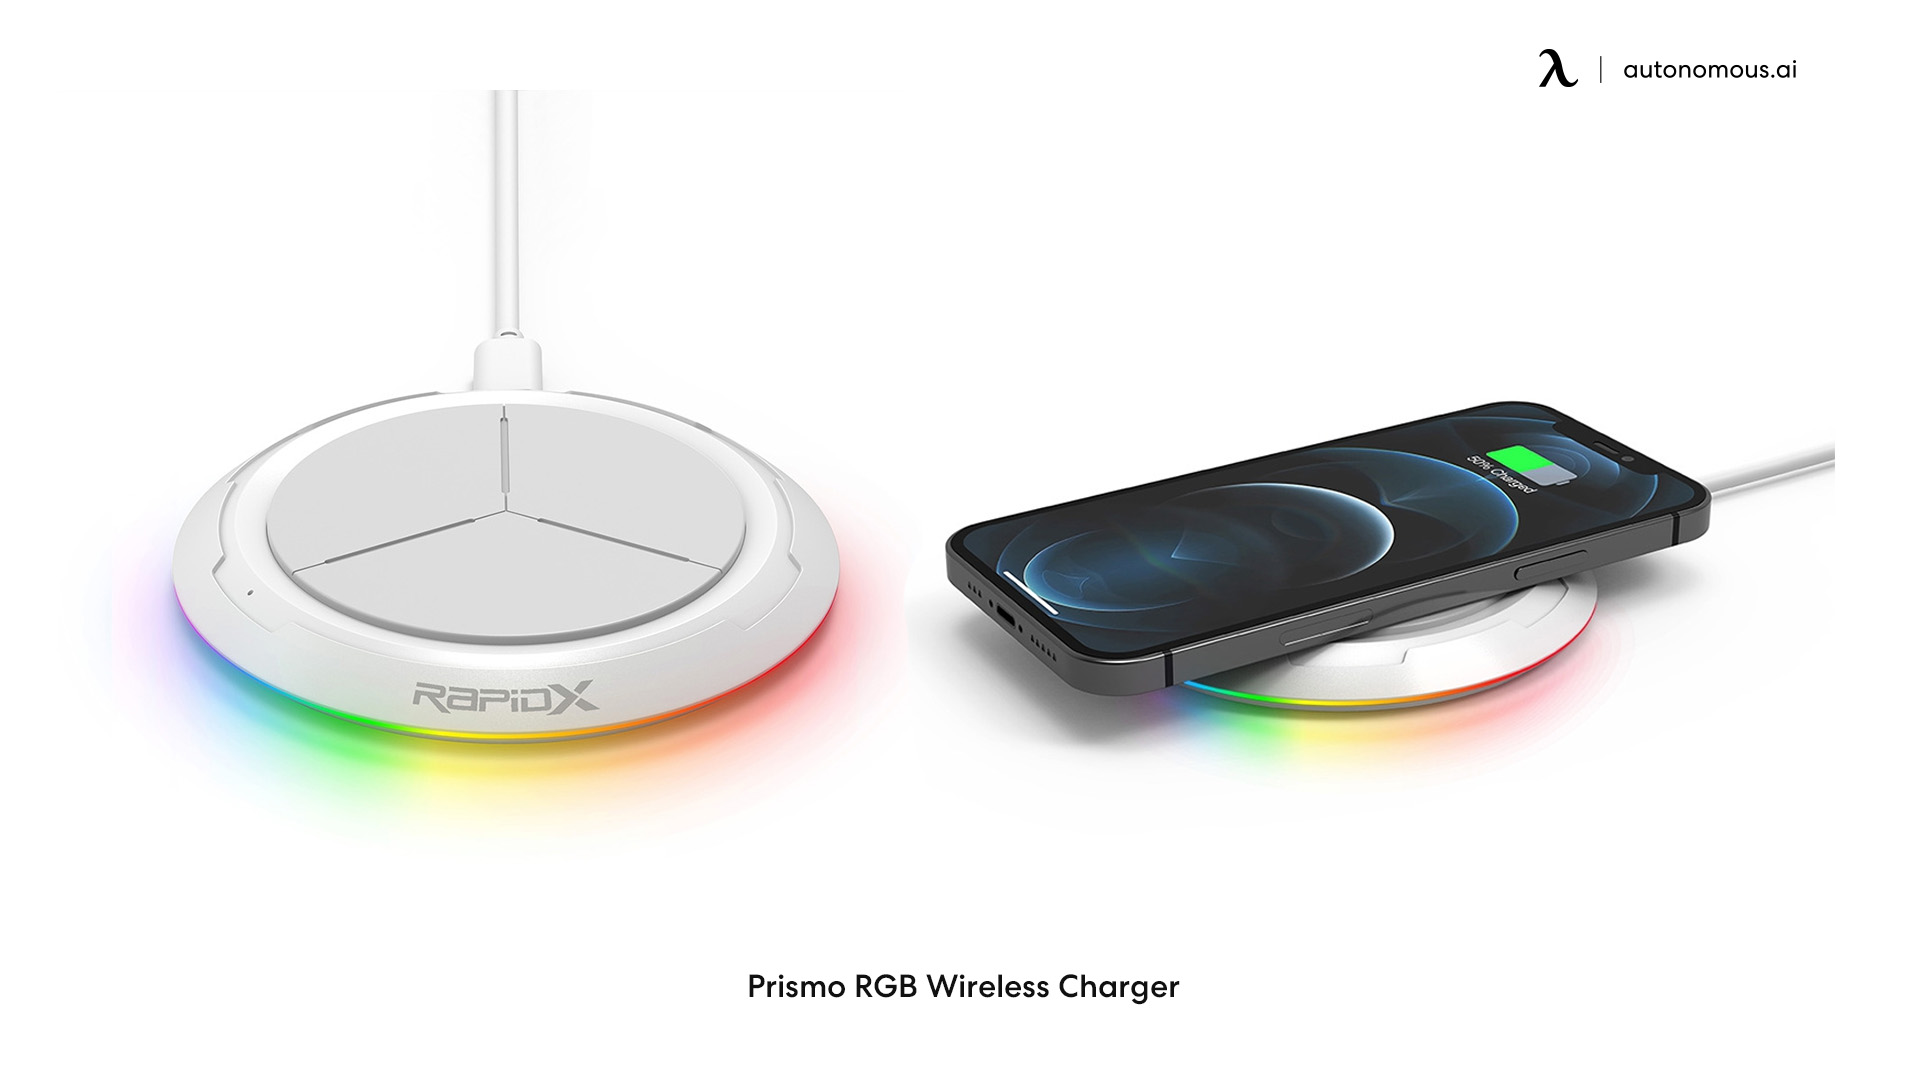 Prismo RGB Wireless Charger